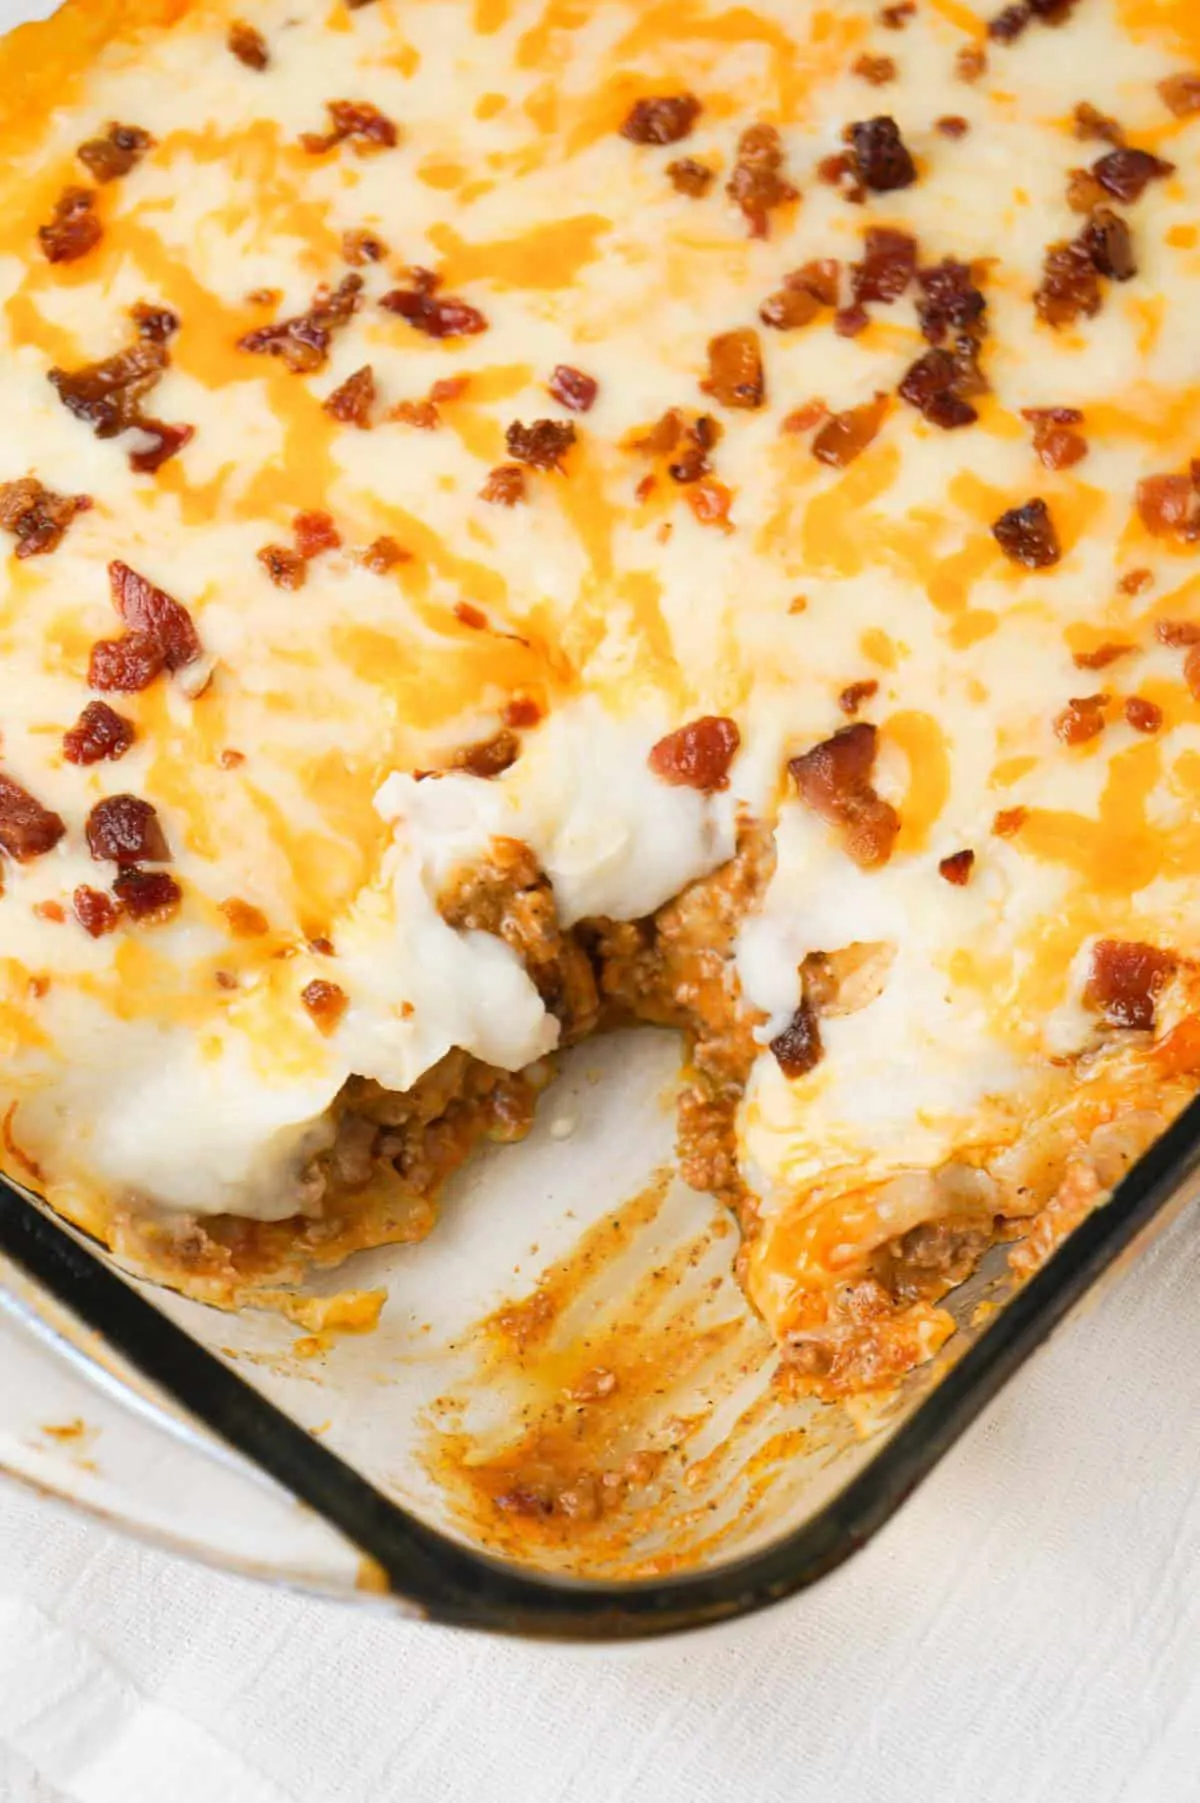 Bacon Cheeseburger Shepherd's Pie is an easy ground beef dinner recipe loaded with crumbled bacon, creamy mashed potatoes and shredded cheese.